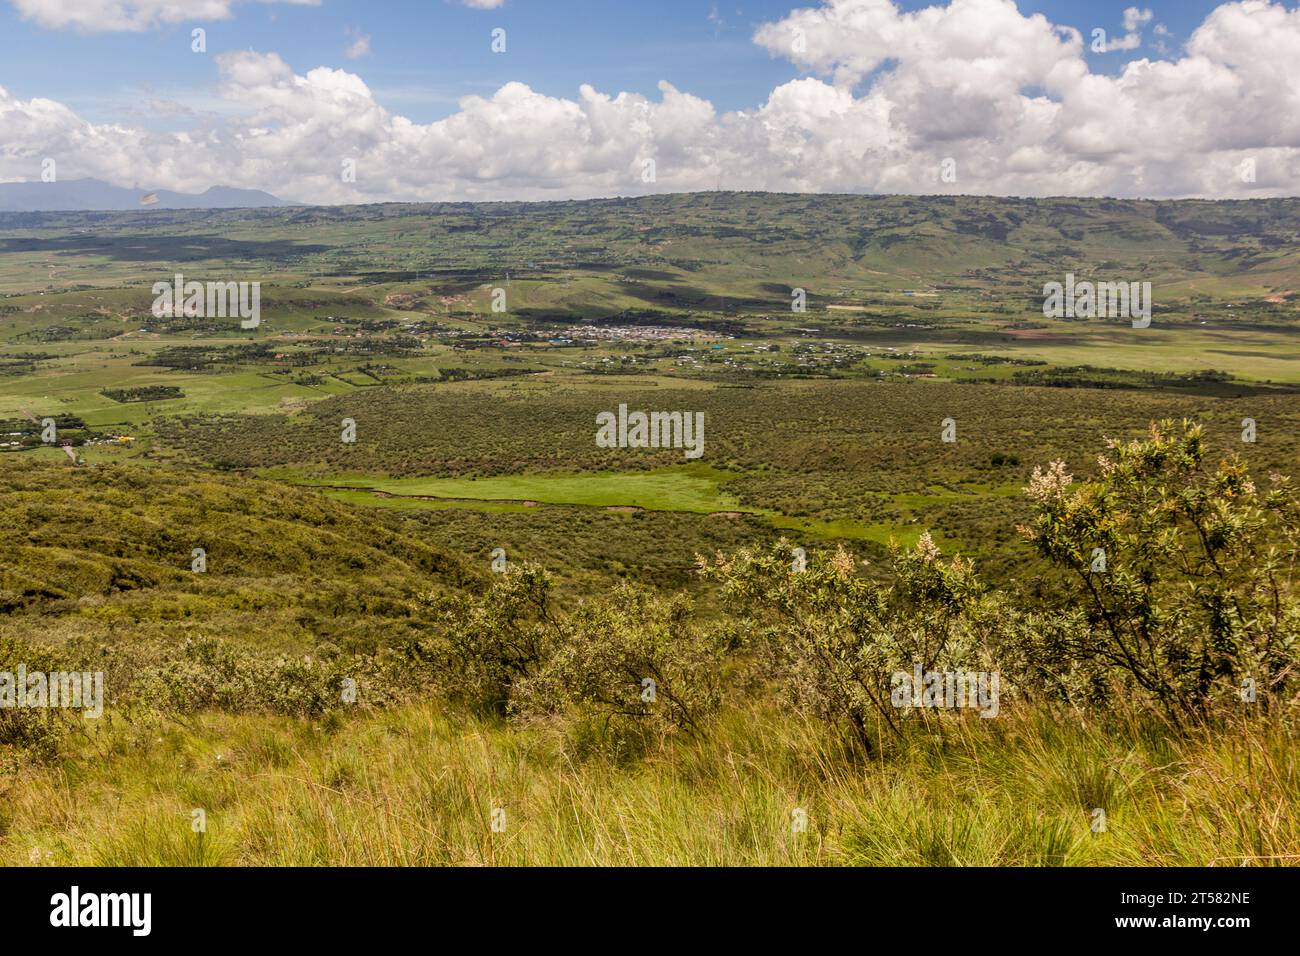 View from the Longonot volcano, Kenya Stock Photo